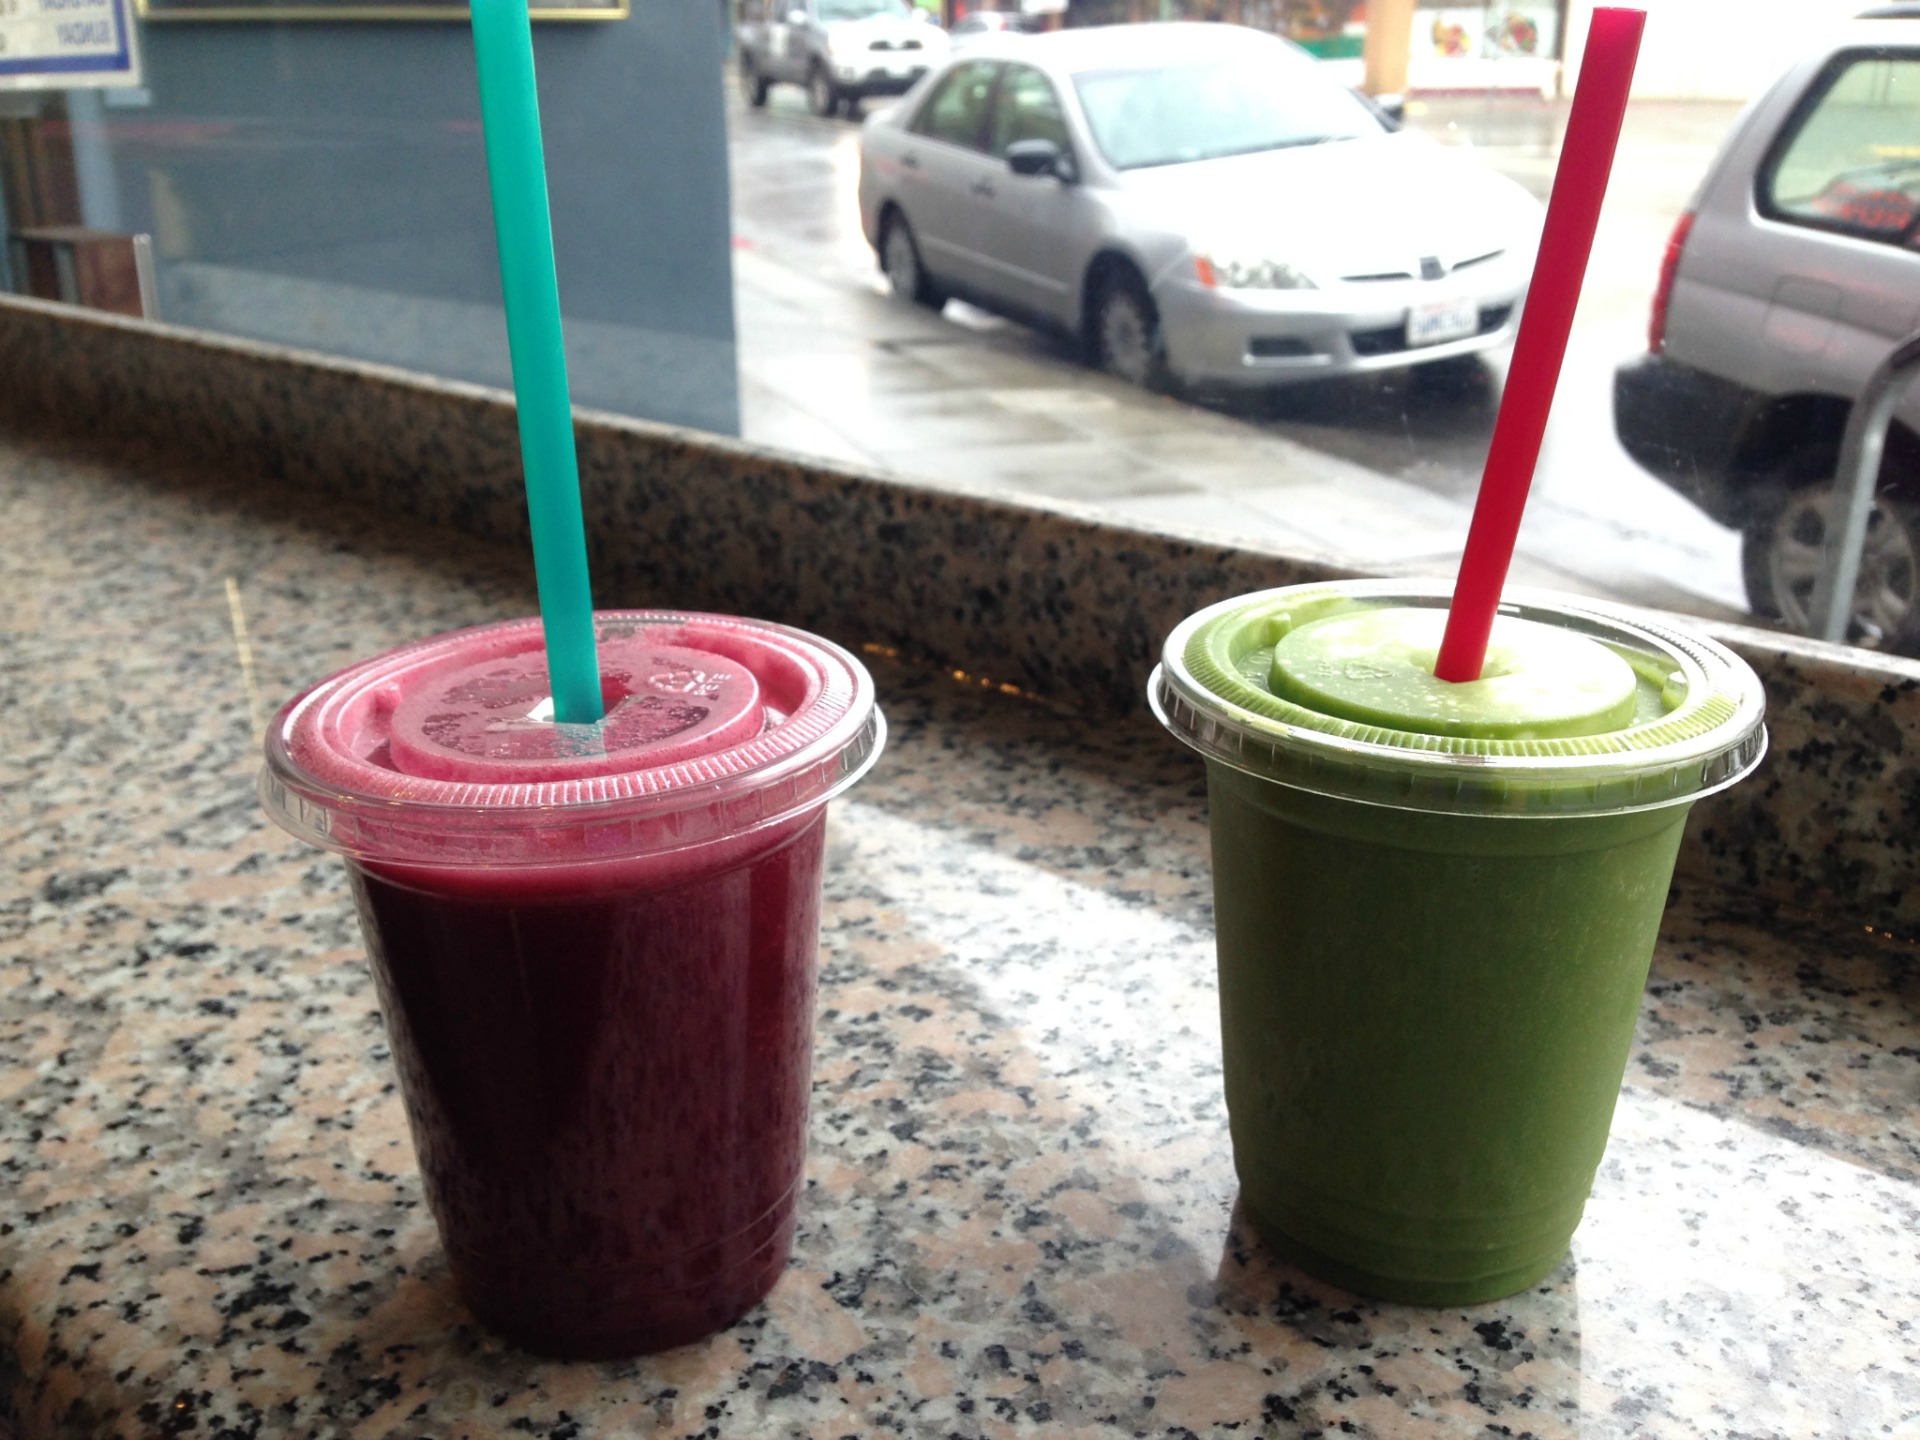 The Radical Radiance juice and Kalein’ It smoothie from Cafe Crush in Oakland